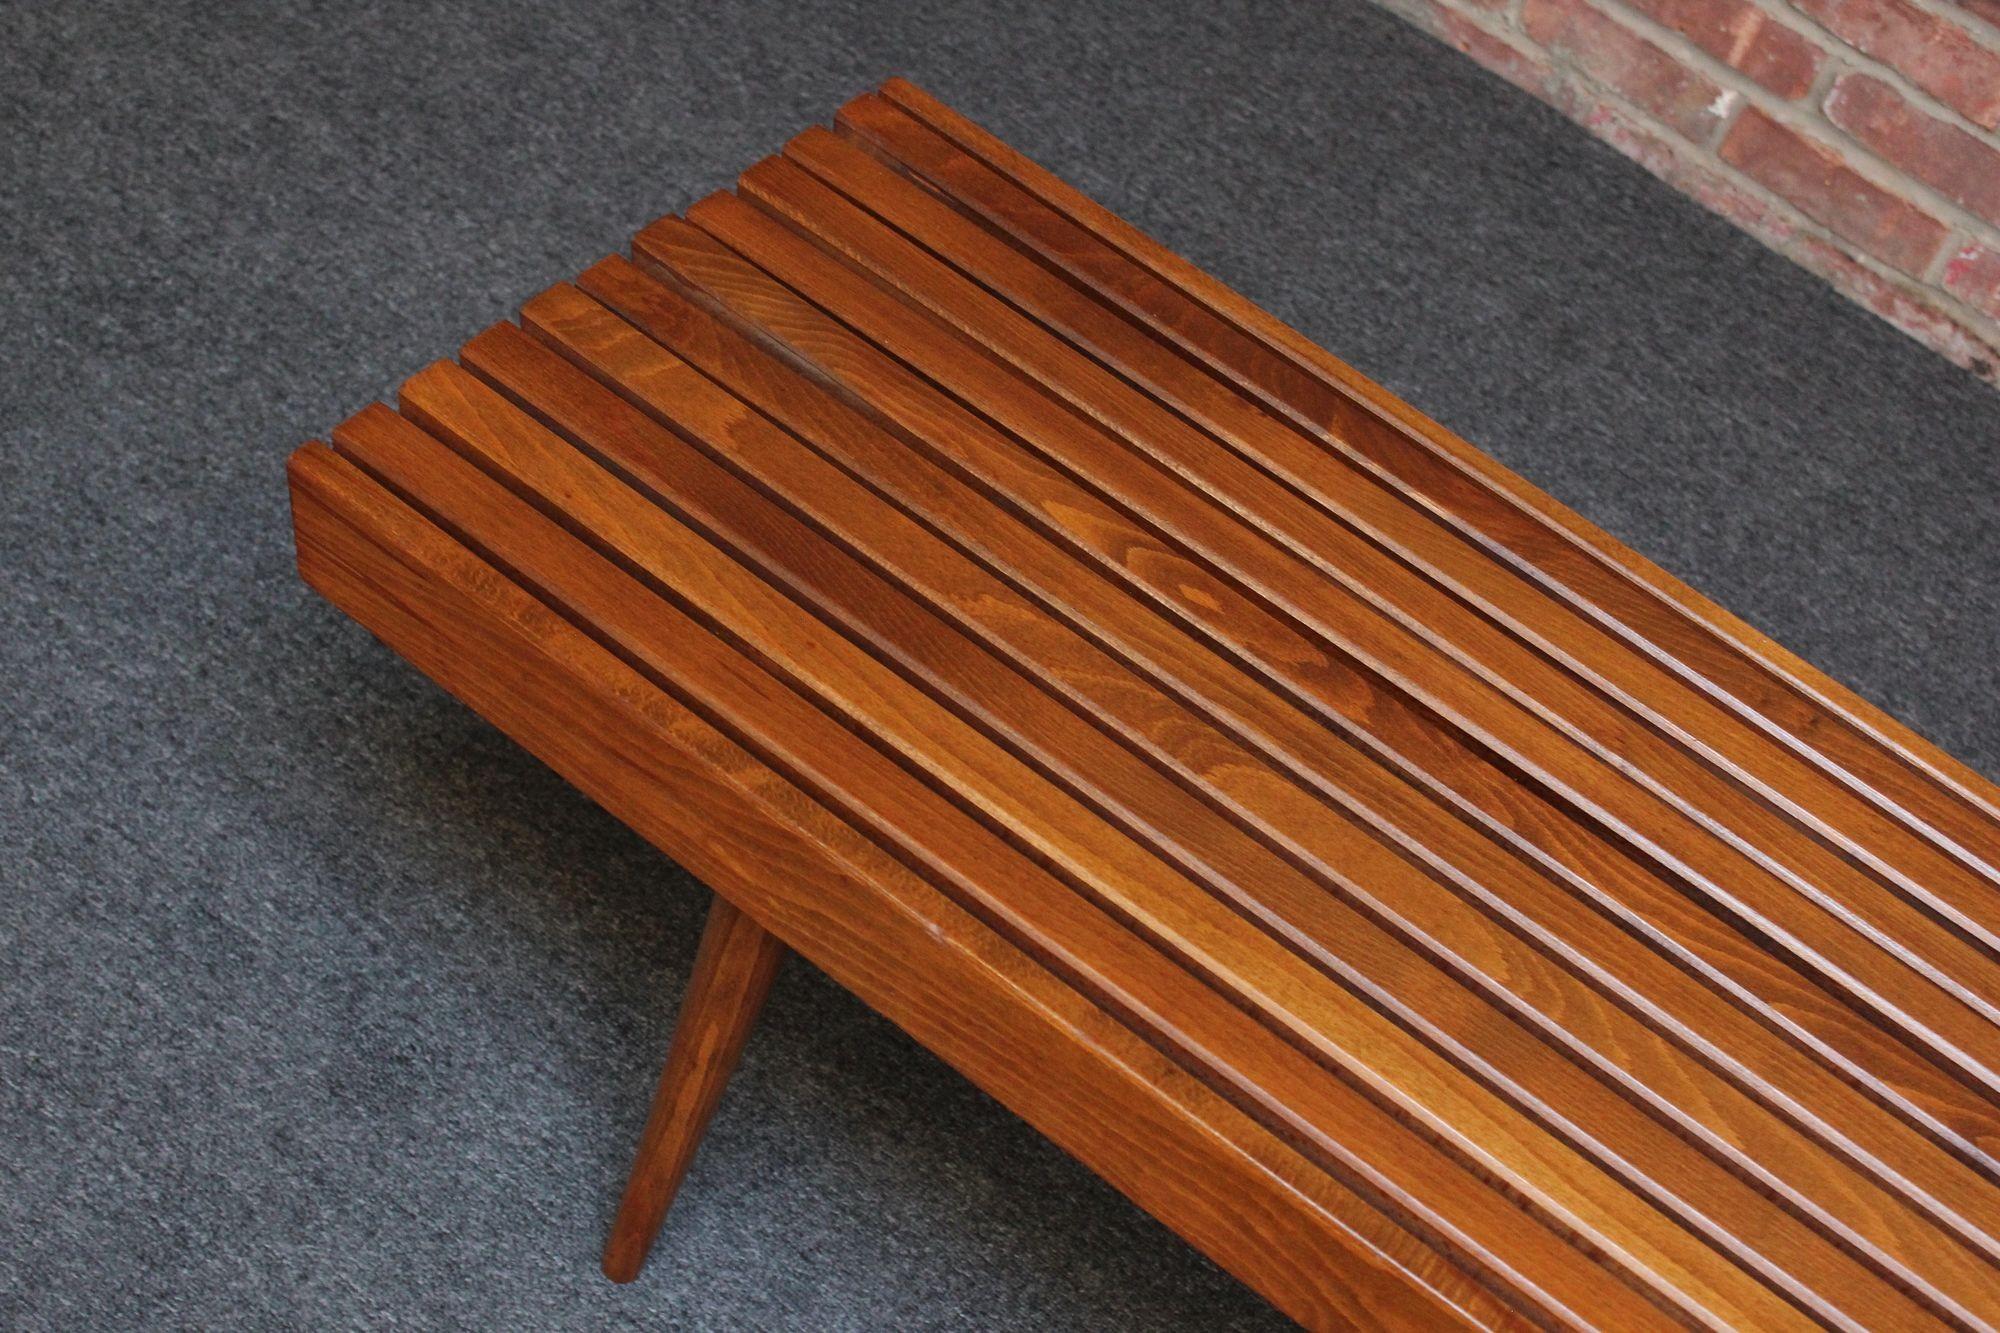 Long Mid-Century Modern Walnut Slatted Bench / Coffee Table with Tapered Legs For Sale 7